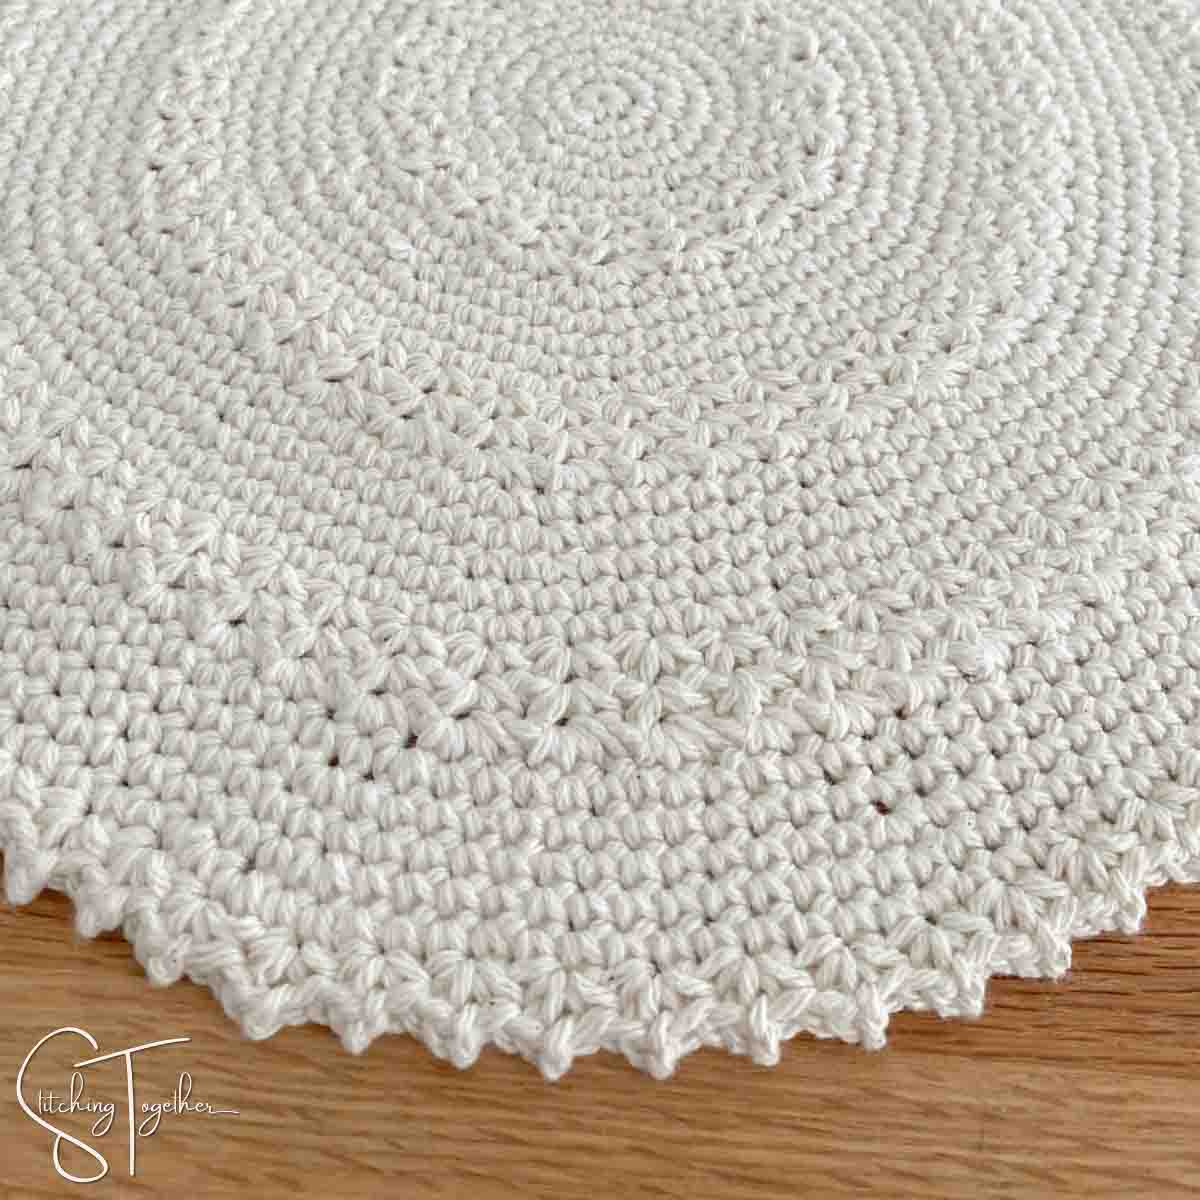 close up of a textured round crochet placemat